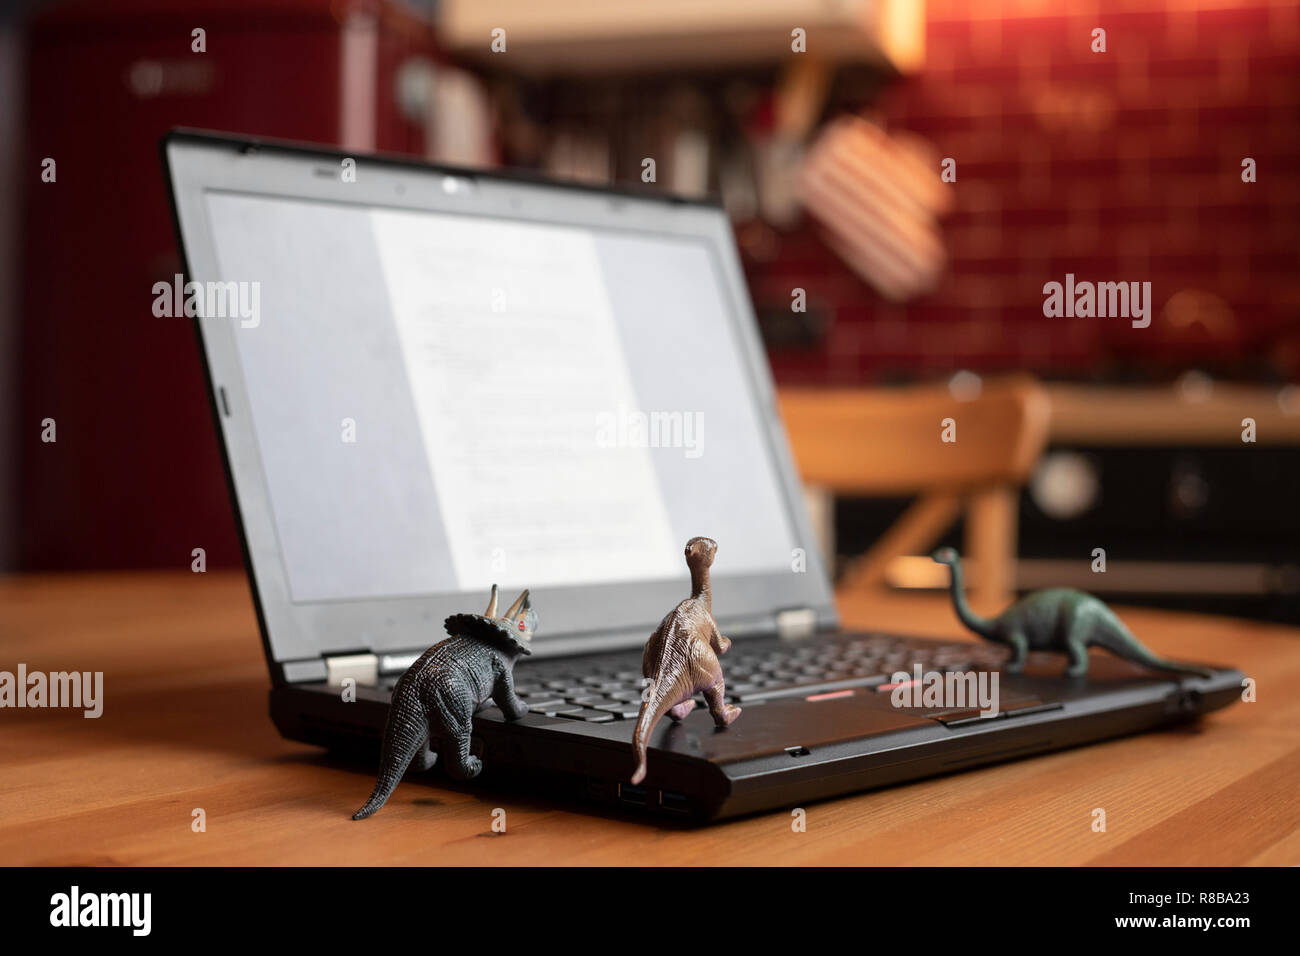 Open laptop on wooden table with small dinosaur toys that seem looking at the screen. Natural light. Smartworking during lockdown symbol. Stock Photo